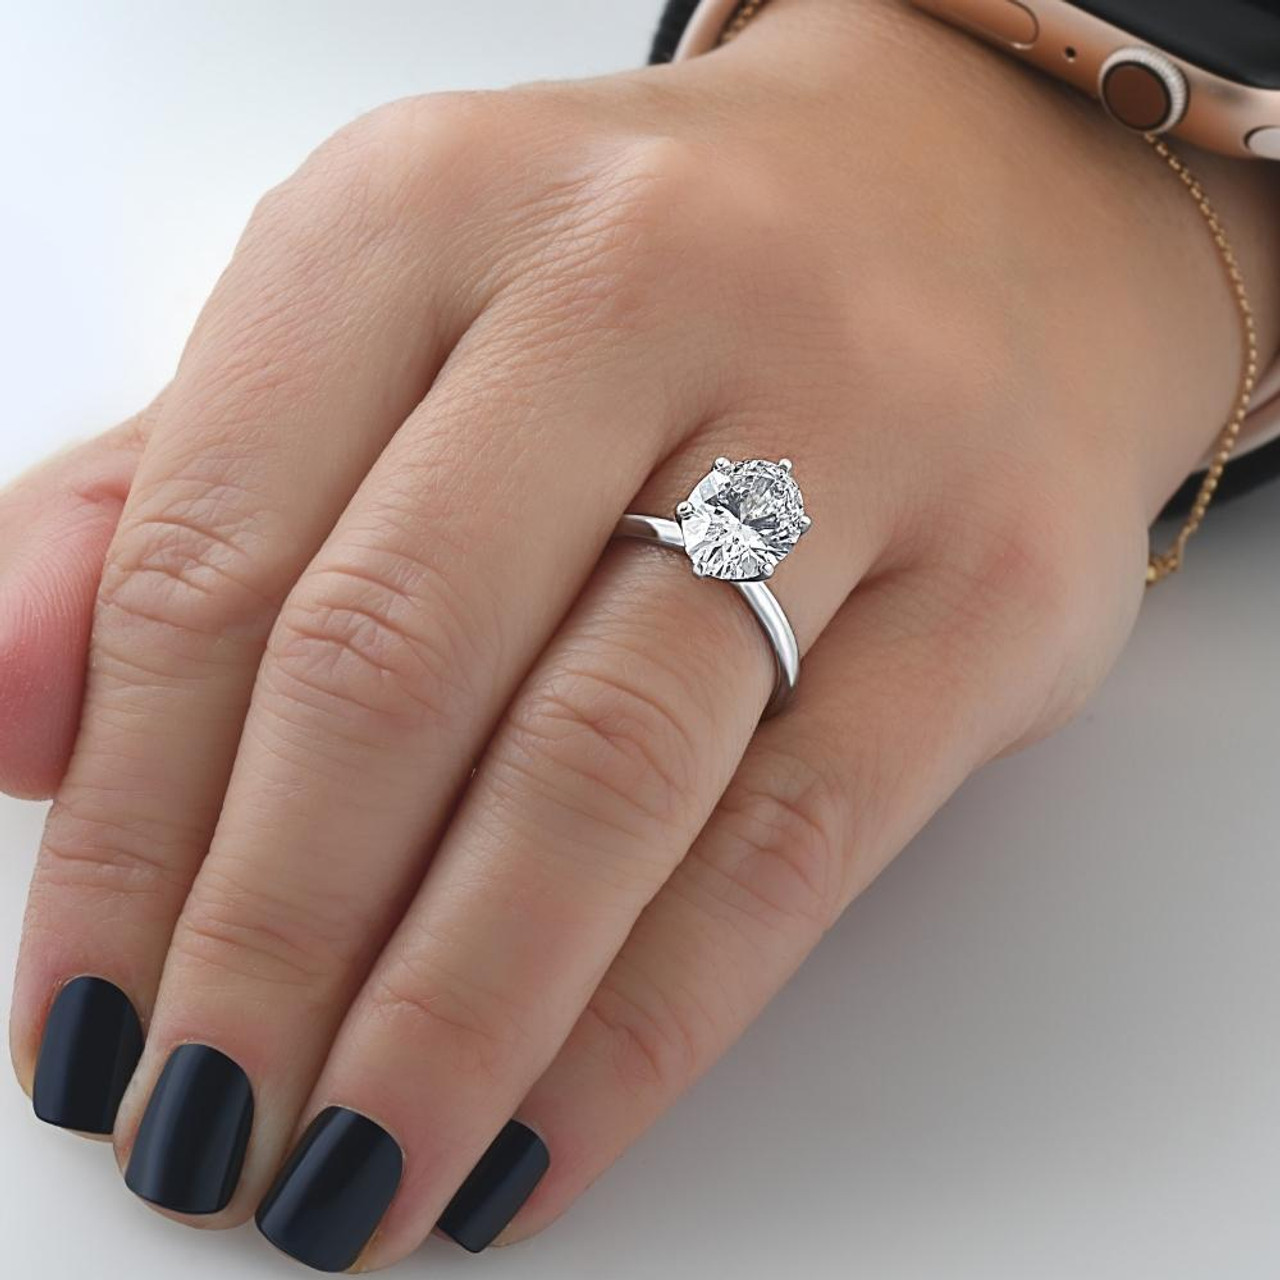 Classy 1 Carat Oval Cut Halo Engagement Ring in White Gold over Sterli —  kisnagems.co.uk